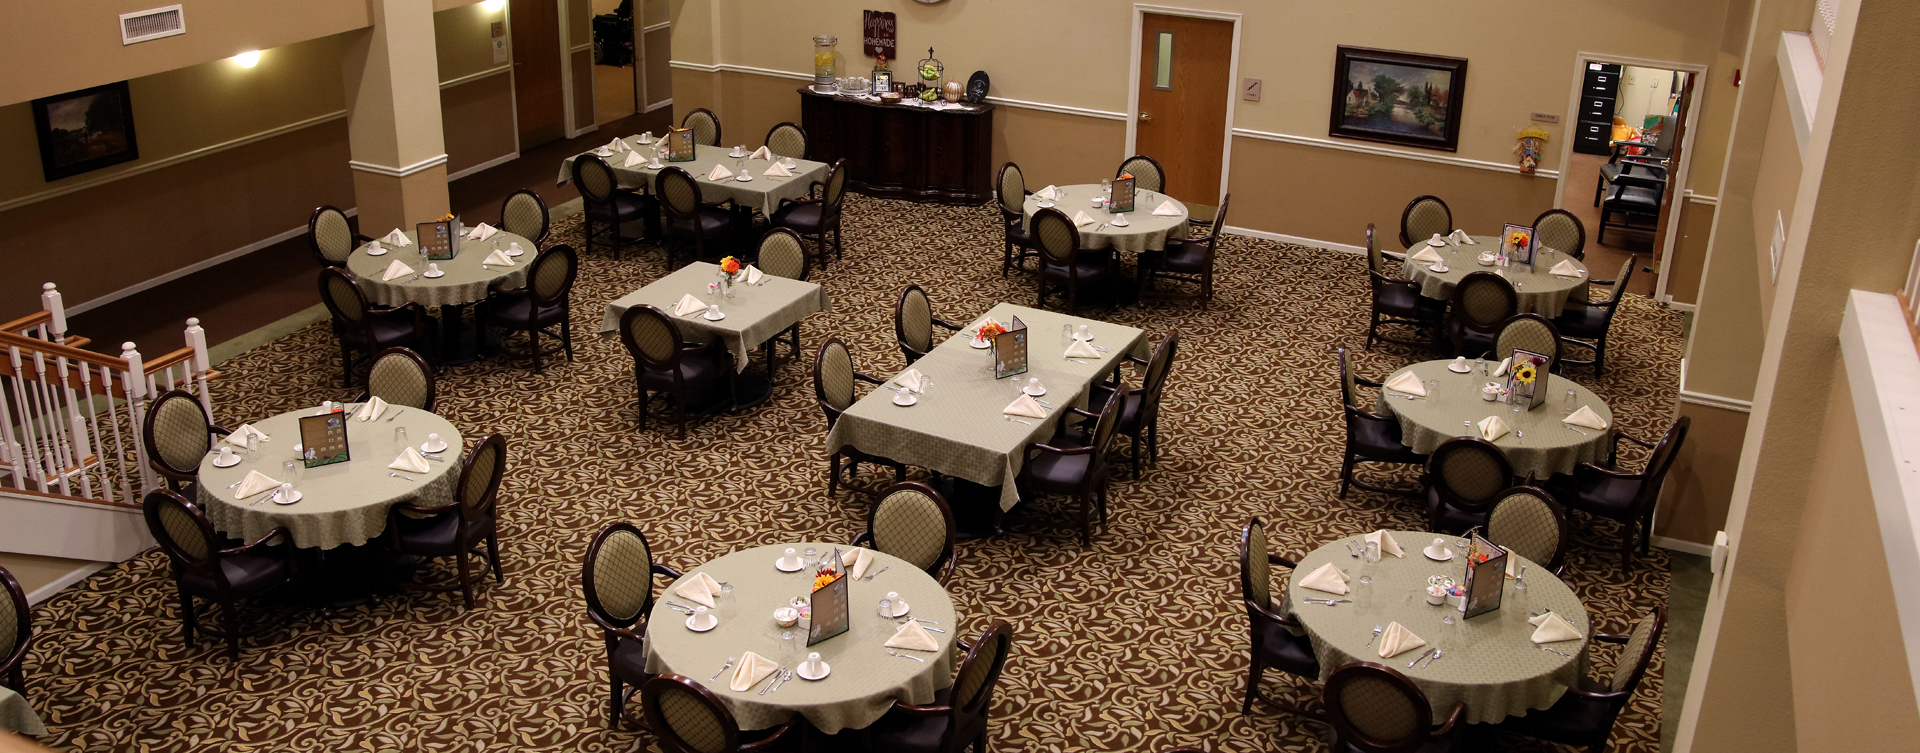 Enjoy homestyle food with made-from-scratch recipes in our dining room at Bickford of Rockford